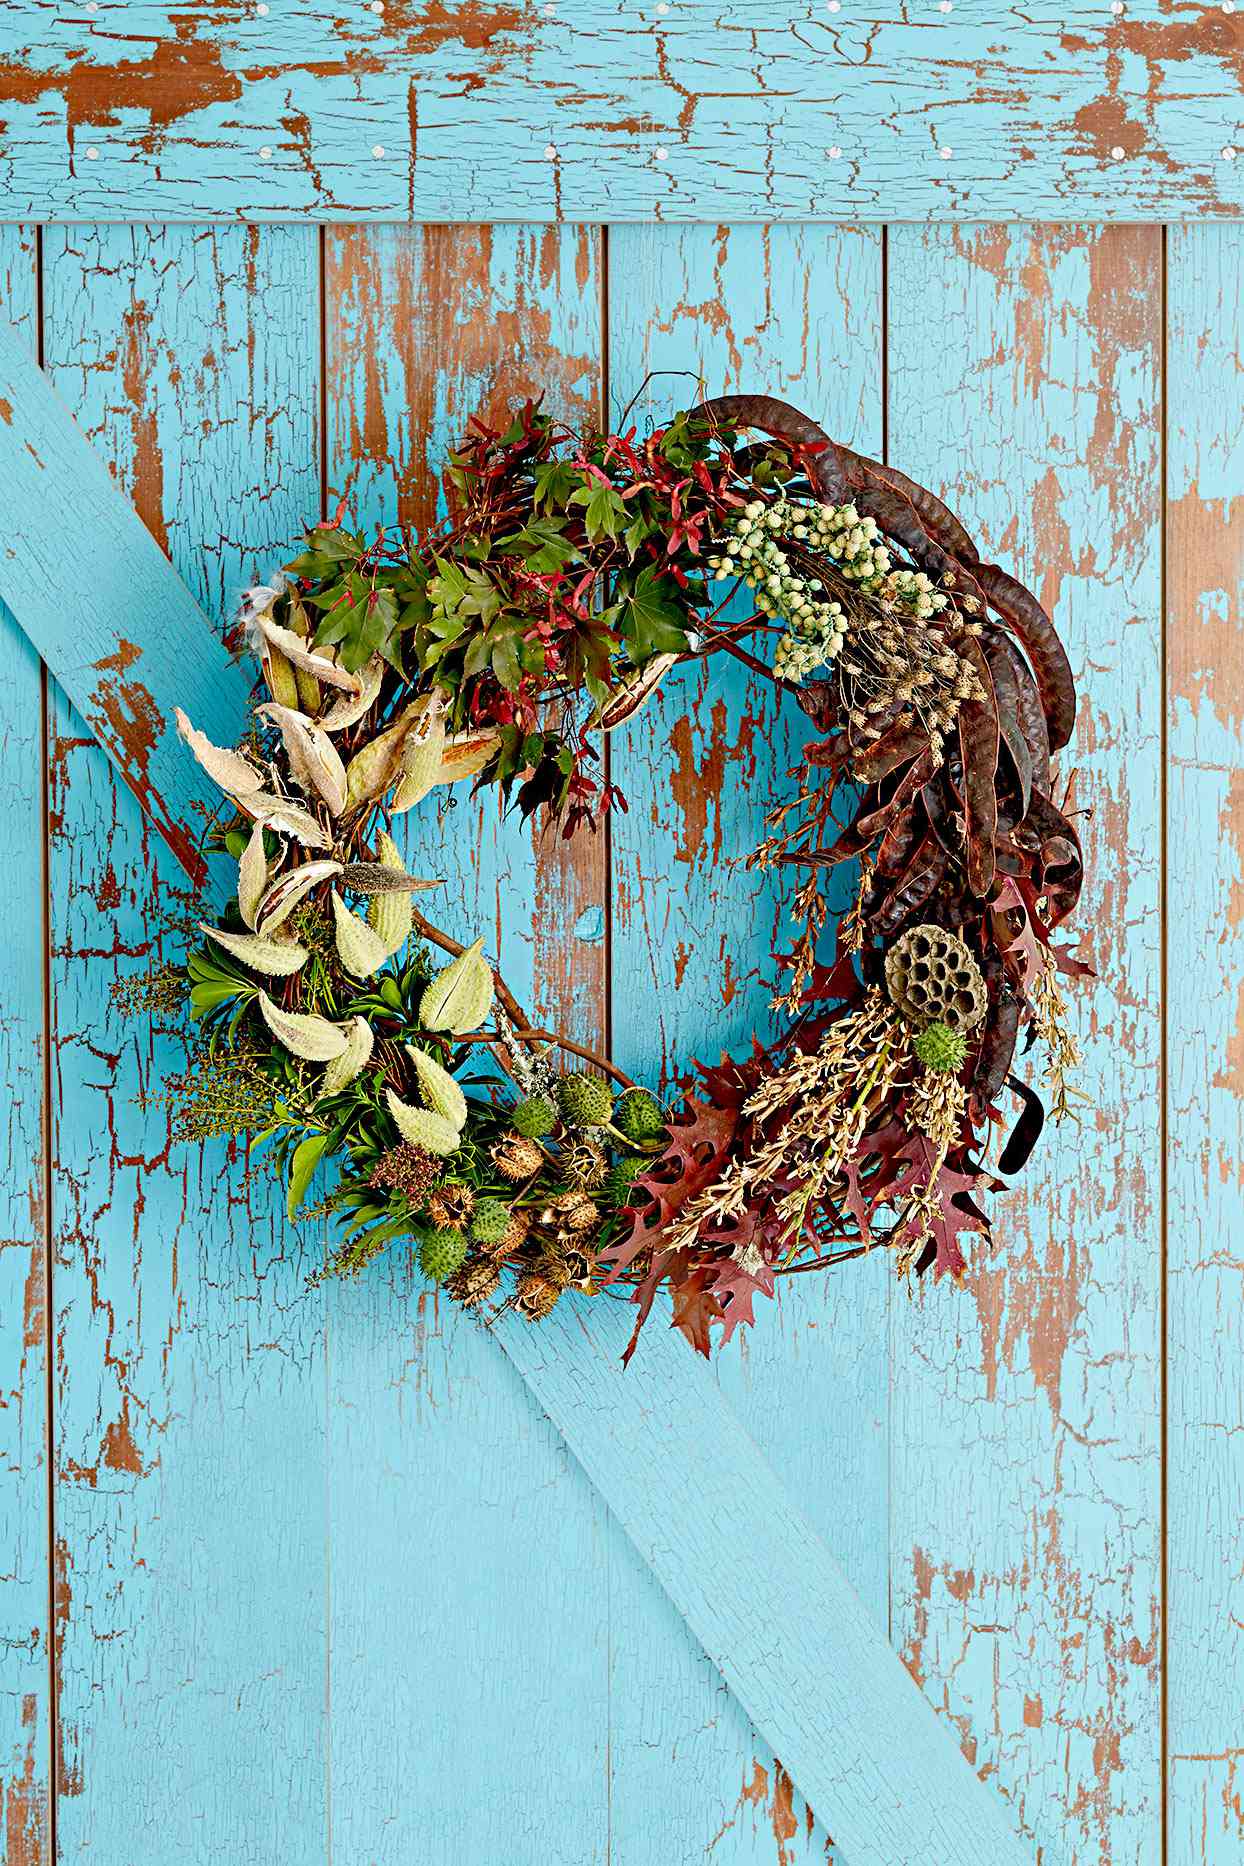 Wreath made of leaves, seed pods, and plants